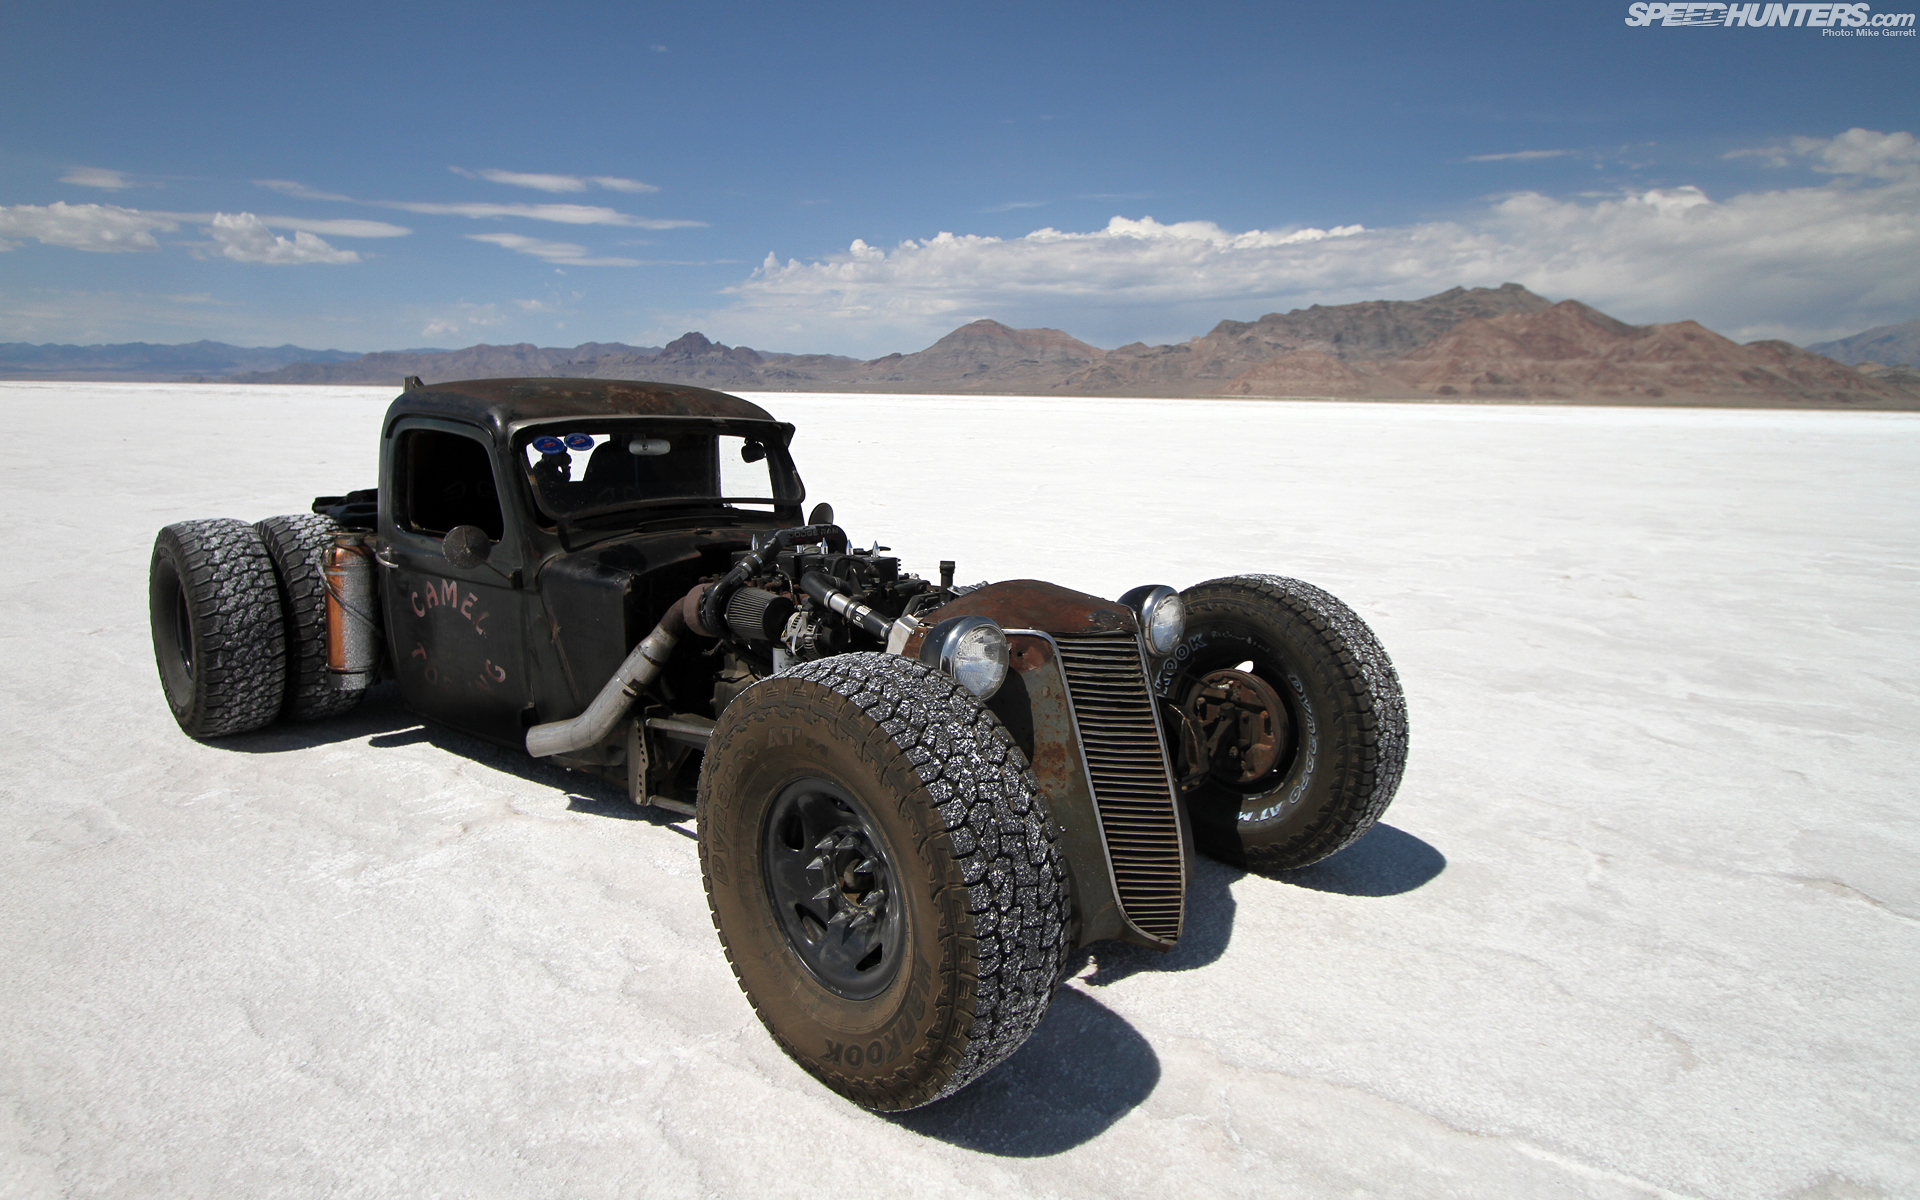 Mobile wallpaper: Rat Rod, Classic Car, Desert, Hot Rod, Vehicles, 250702  download the picture for free.